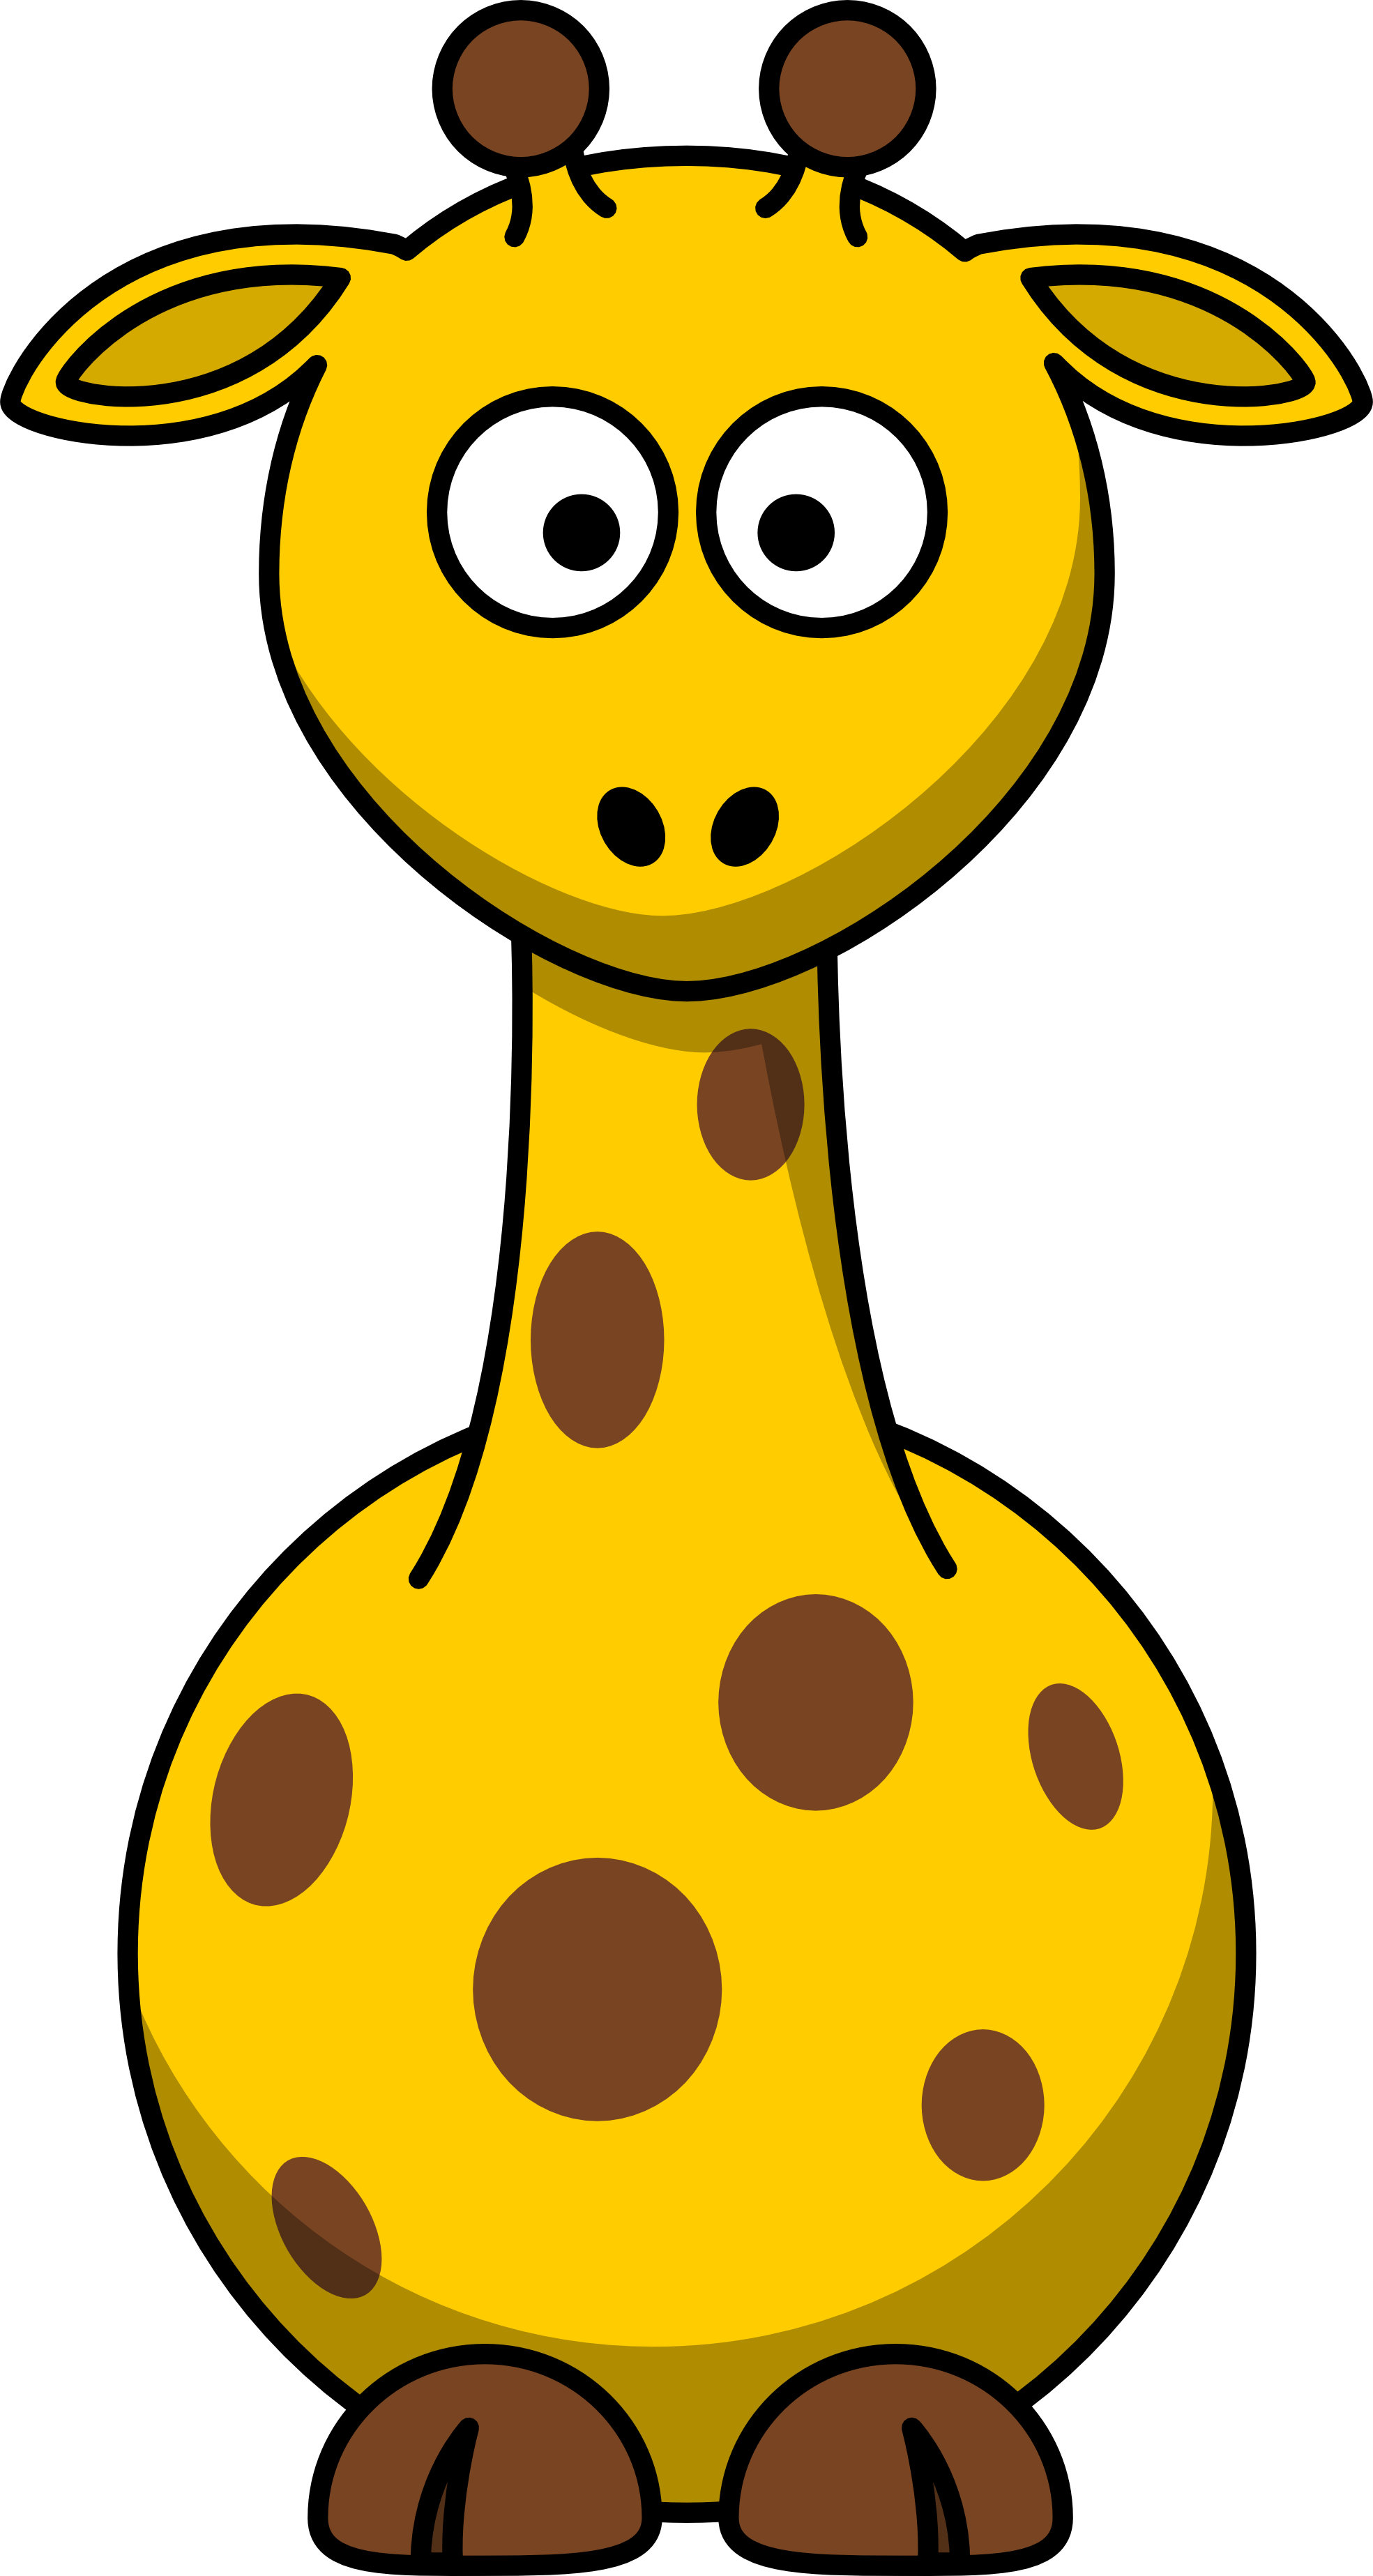 15 Cartoon Giraffe Face Free Cliparts That You Can Download To You